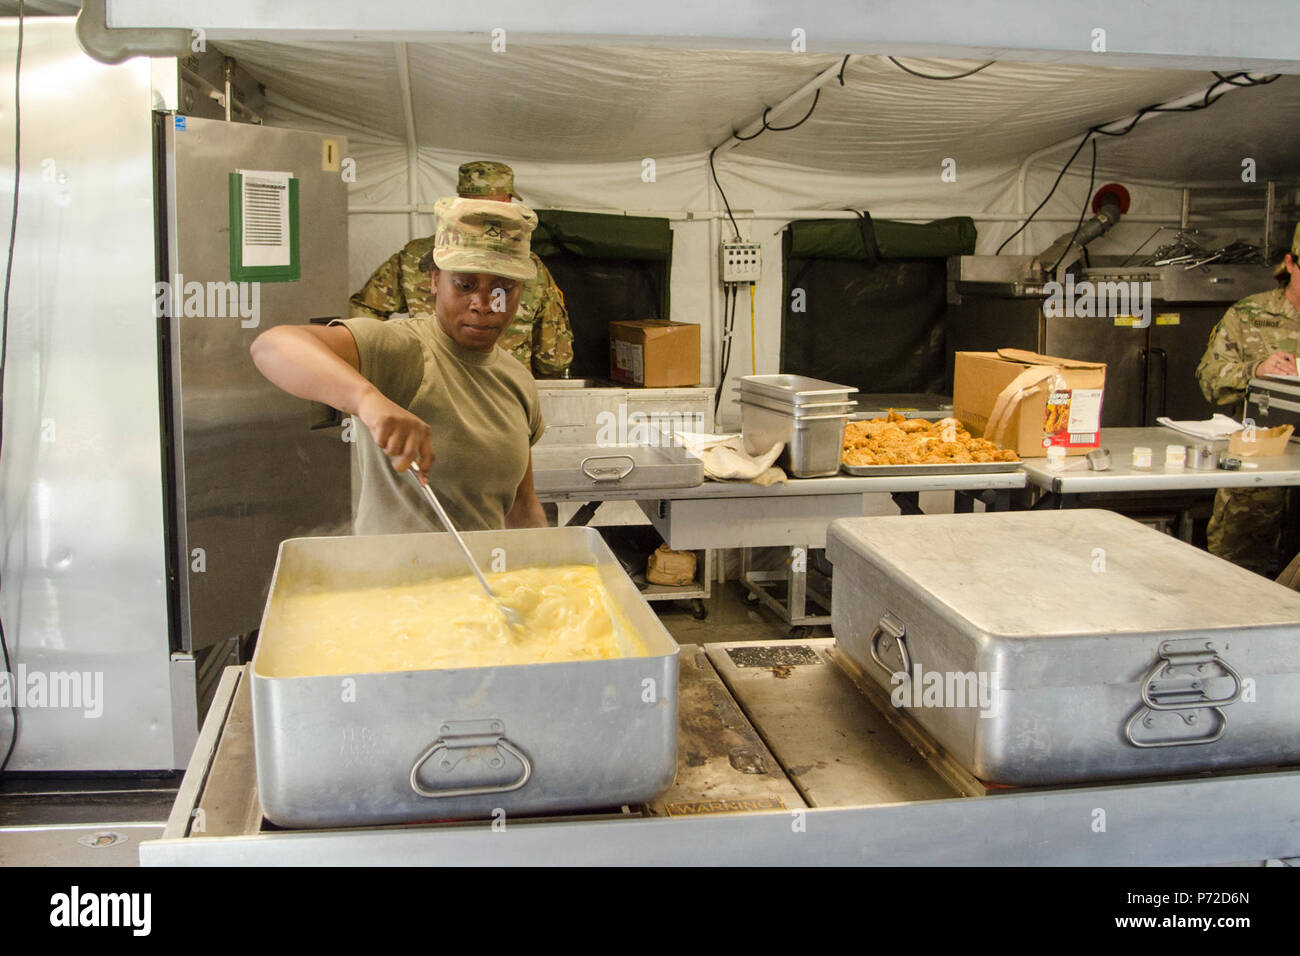 Private 1st Class Desiree Slaton, a food service specialist assigned to E Company, 6th Battalion, 101st General Support Aviation Battalion, 101st Combat Aviation Brigade, 101st Airborne Division, prepares potatoes au gratin for the field feeding portion of the Philip A. Connelly Program May 11, 2017, at Fort Campbell, Kentucky. Two warrant officers from the XVIII Airborne Corps conducted an evaluation of the 101st CAB team to determine if they would advance in the competition. Stock Photo